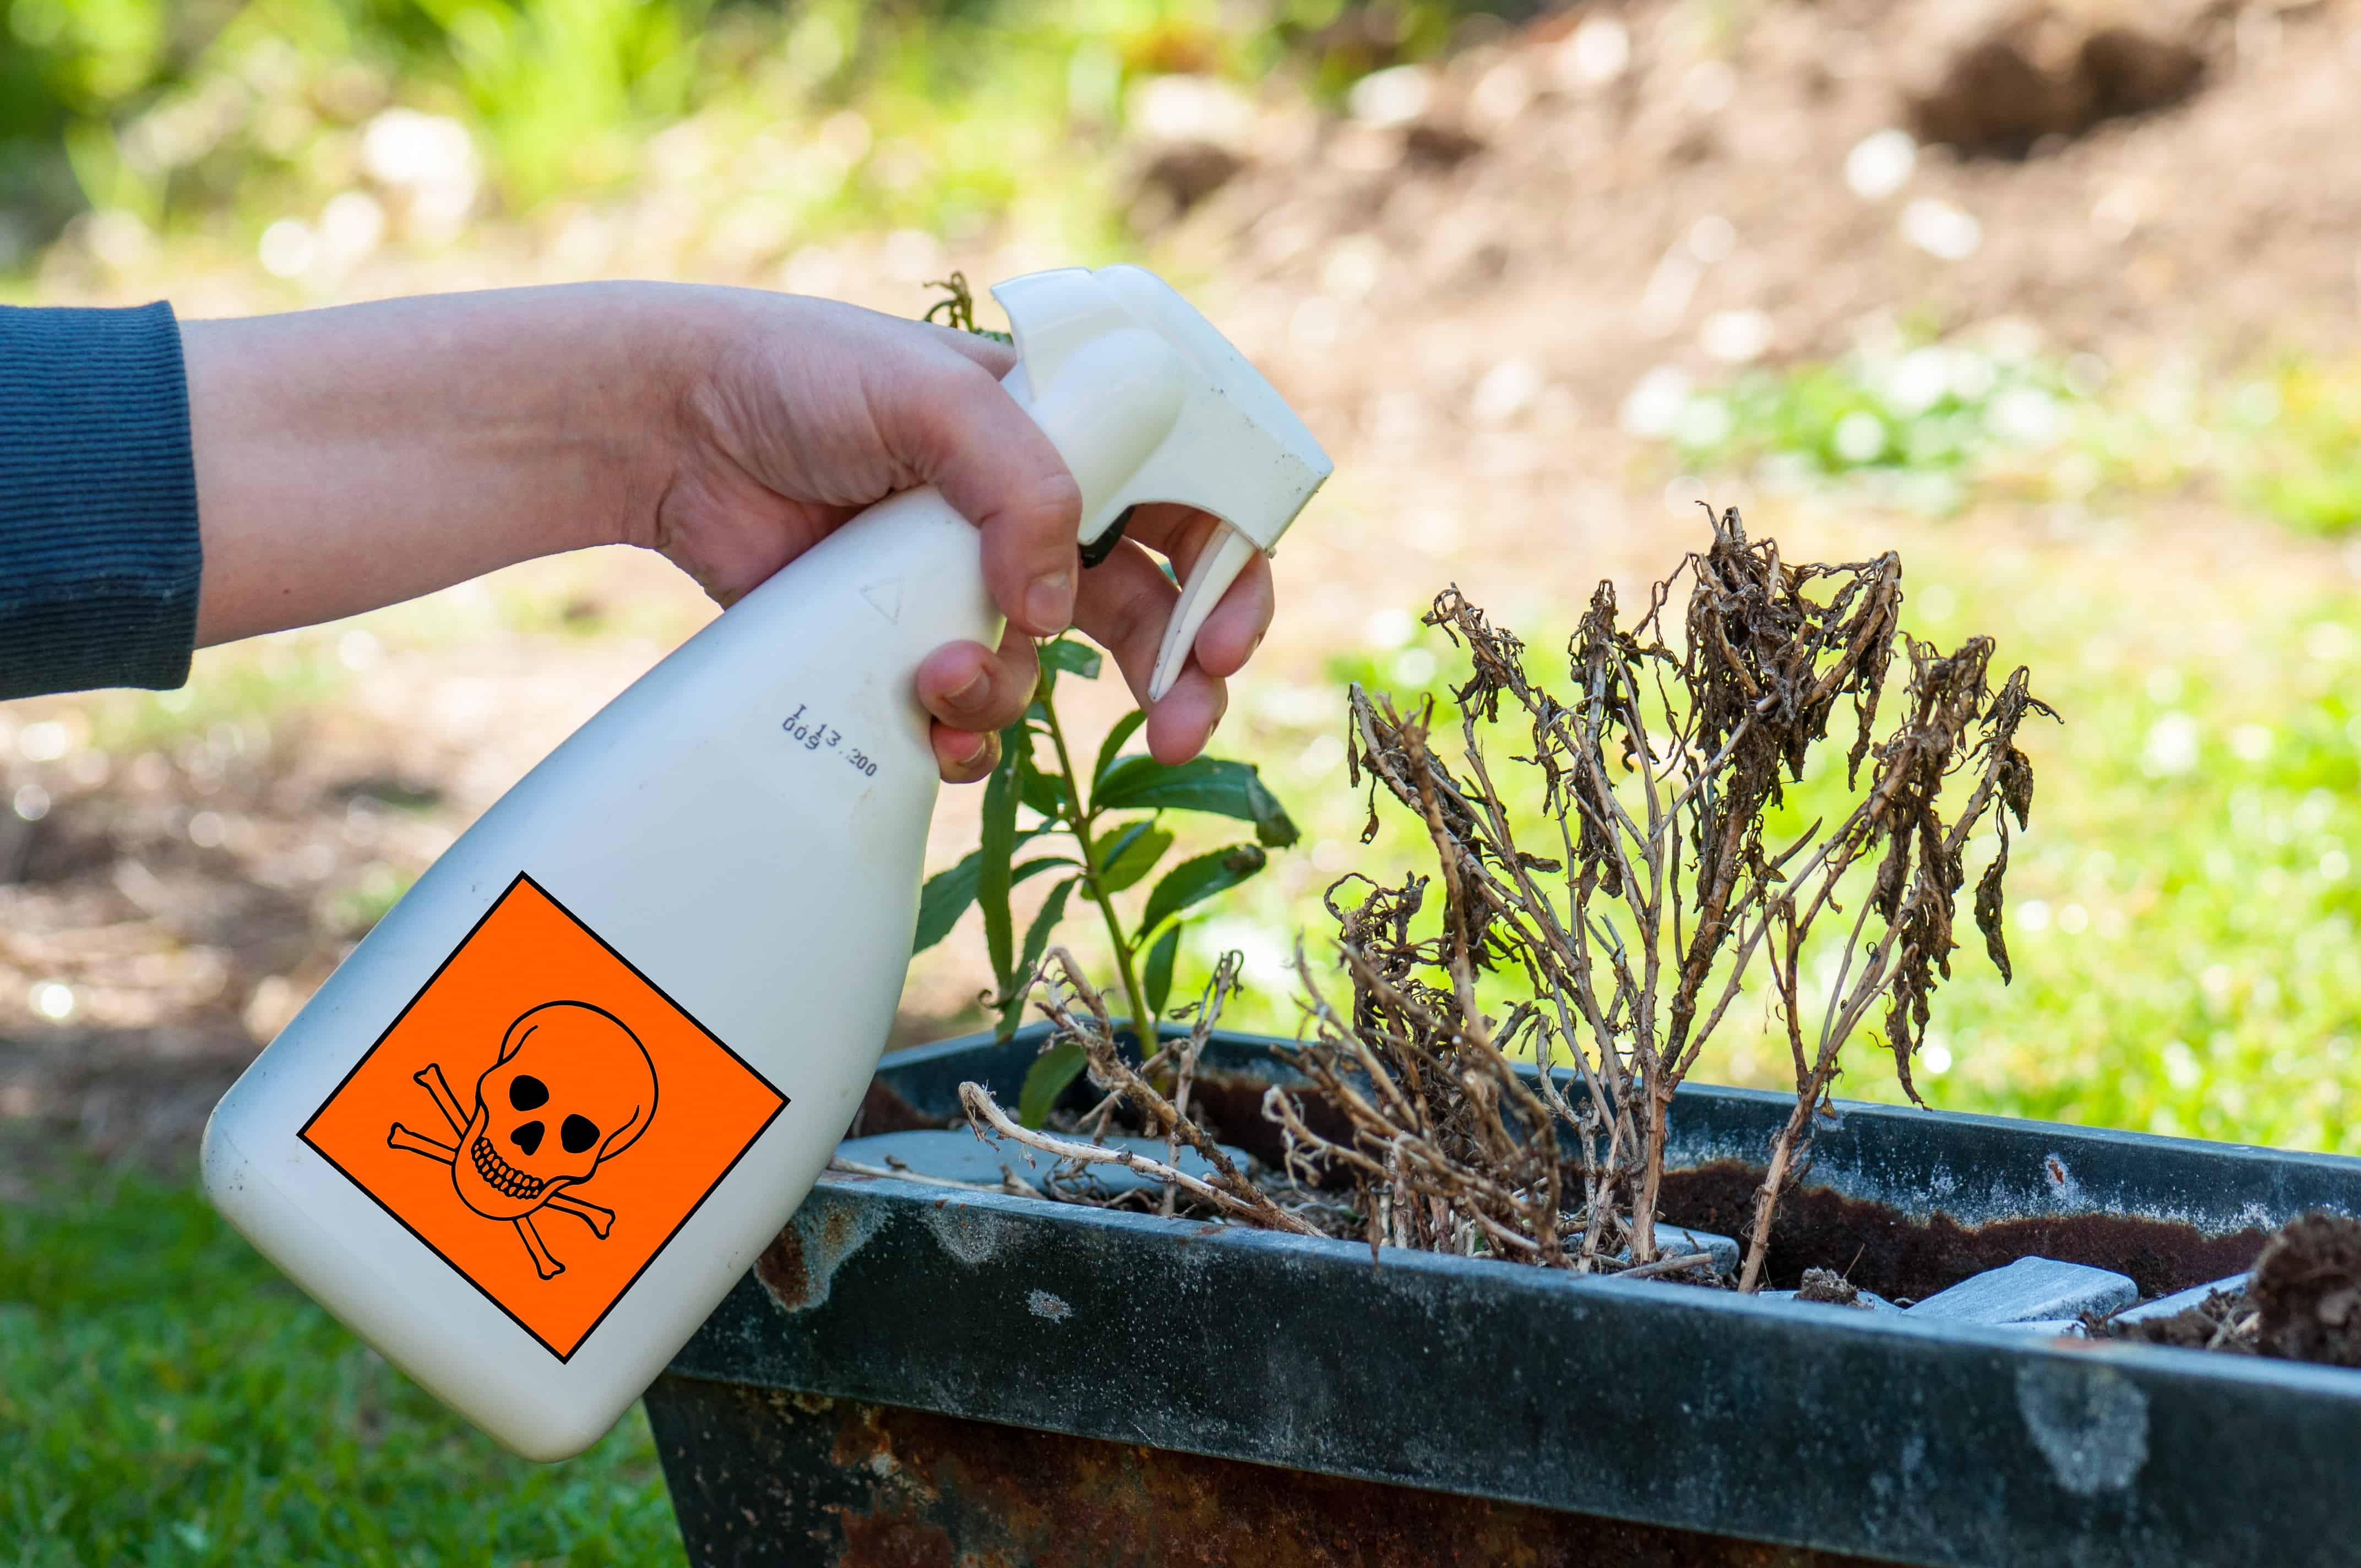 woman's hand holding spray bottle and spraying plants